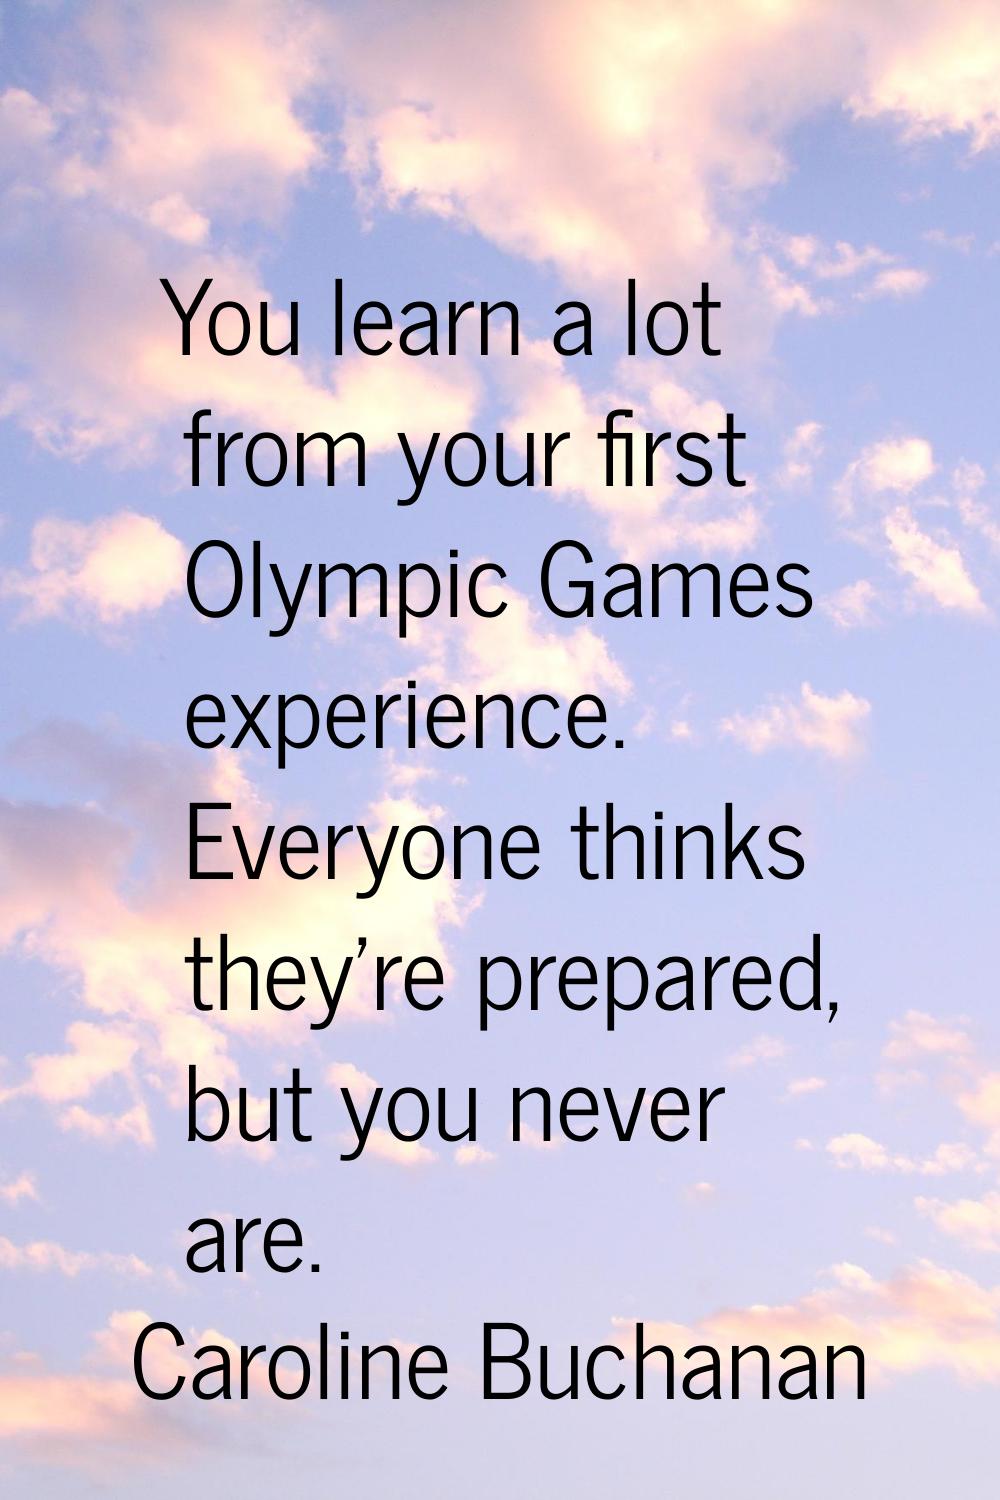 You learn a lot from your first Olympic Games experience. Everyone thinks they're prepared, but you